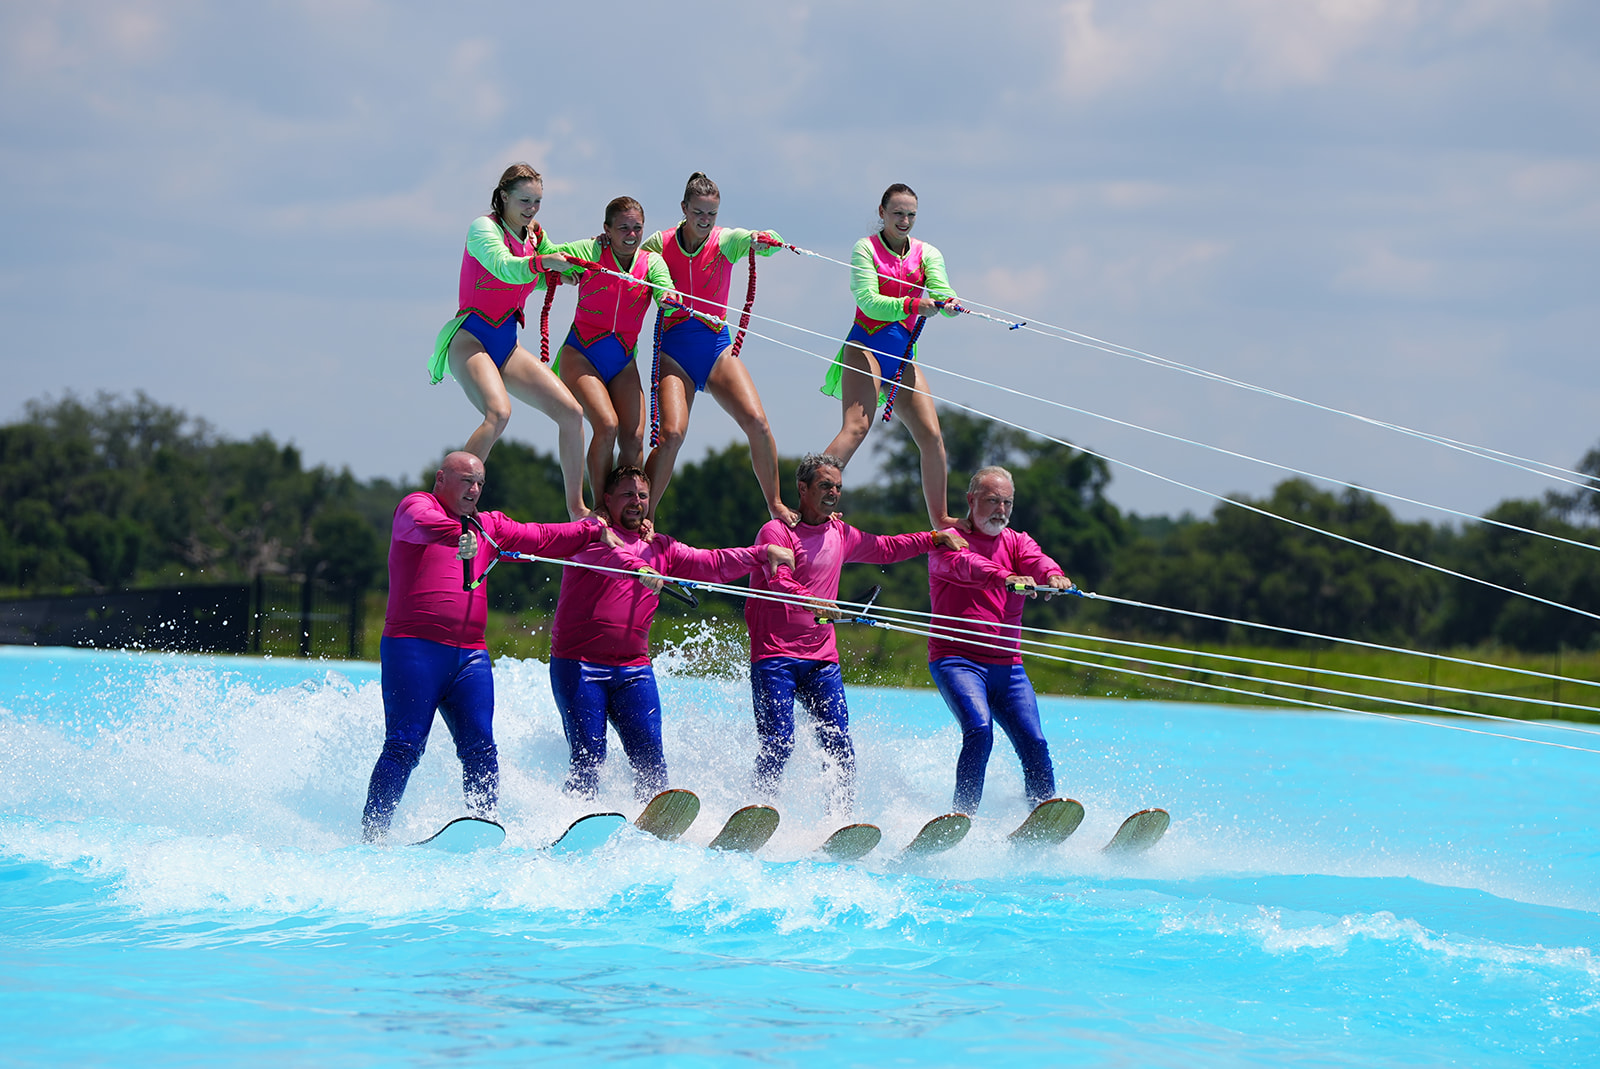 Water skiers stack up in a pyramid on the water 